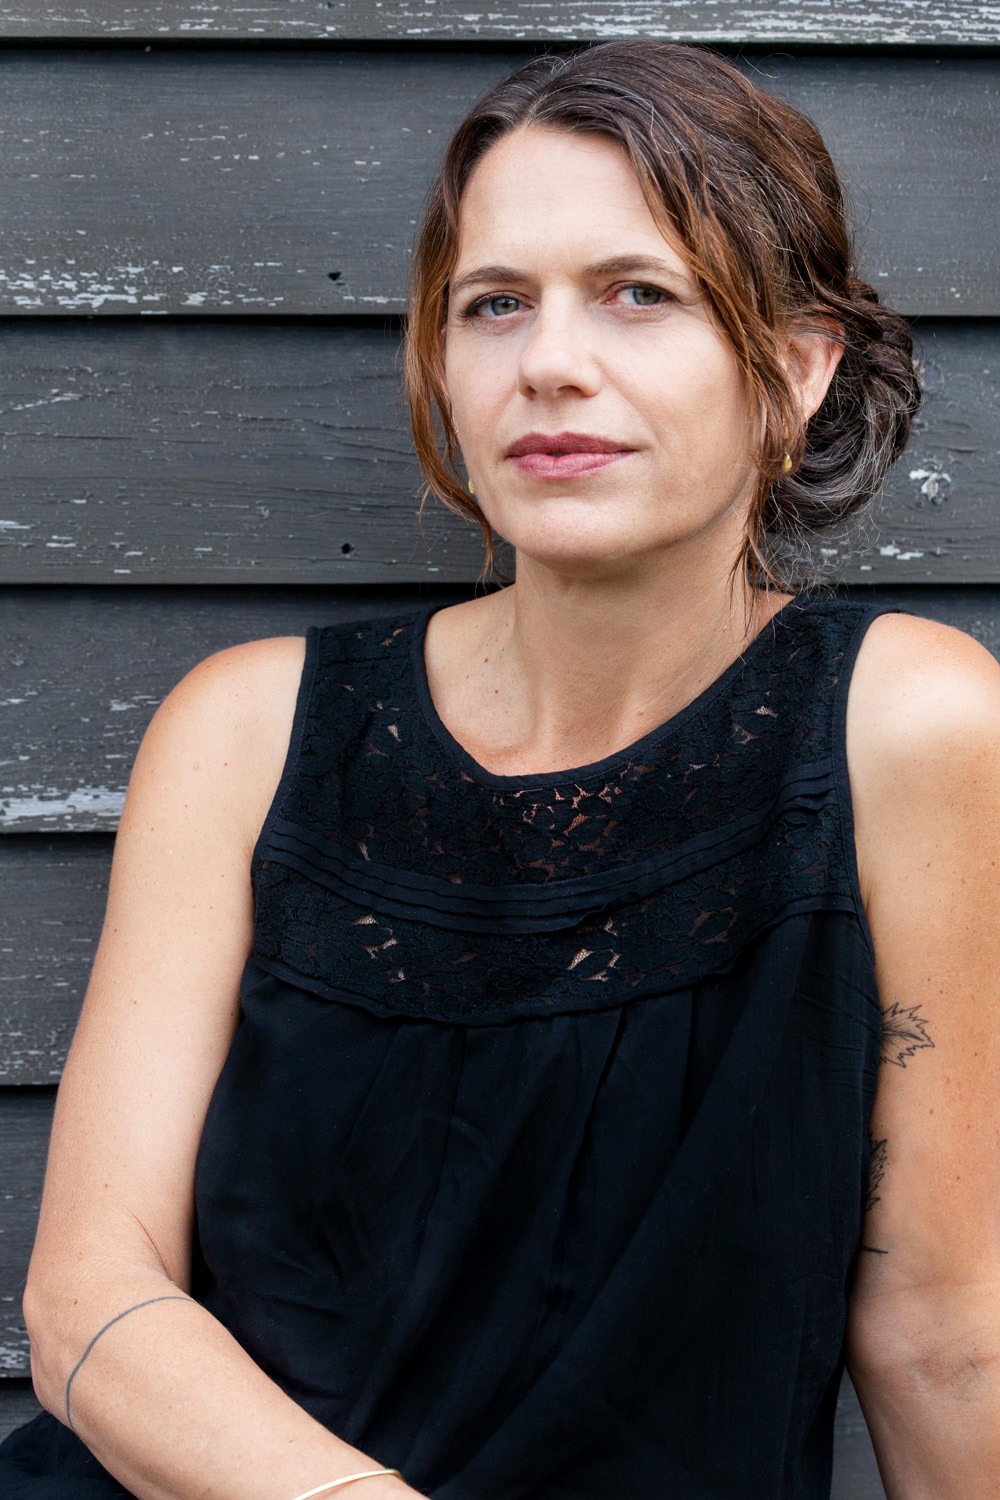 A white woman with olive skin wearing a black sleeveless shirt sits in front of a sunlit exterior house wall with black, chipping paint. She is looking at the camera and looks relaxed with a slight smile. Her dyed reddish-brown hair is loosely gathered and streaked with gray, and a fragment of a tattoo of a hawthorn plant is visible on her arm.